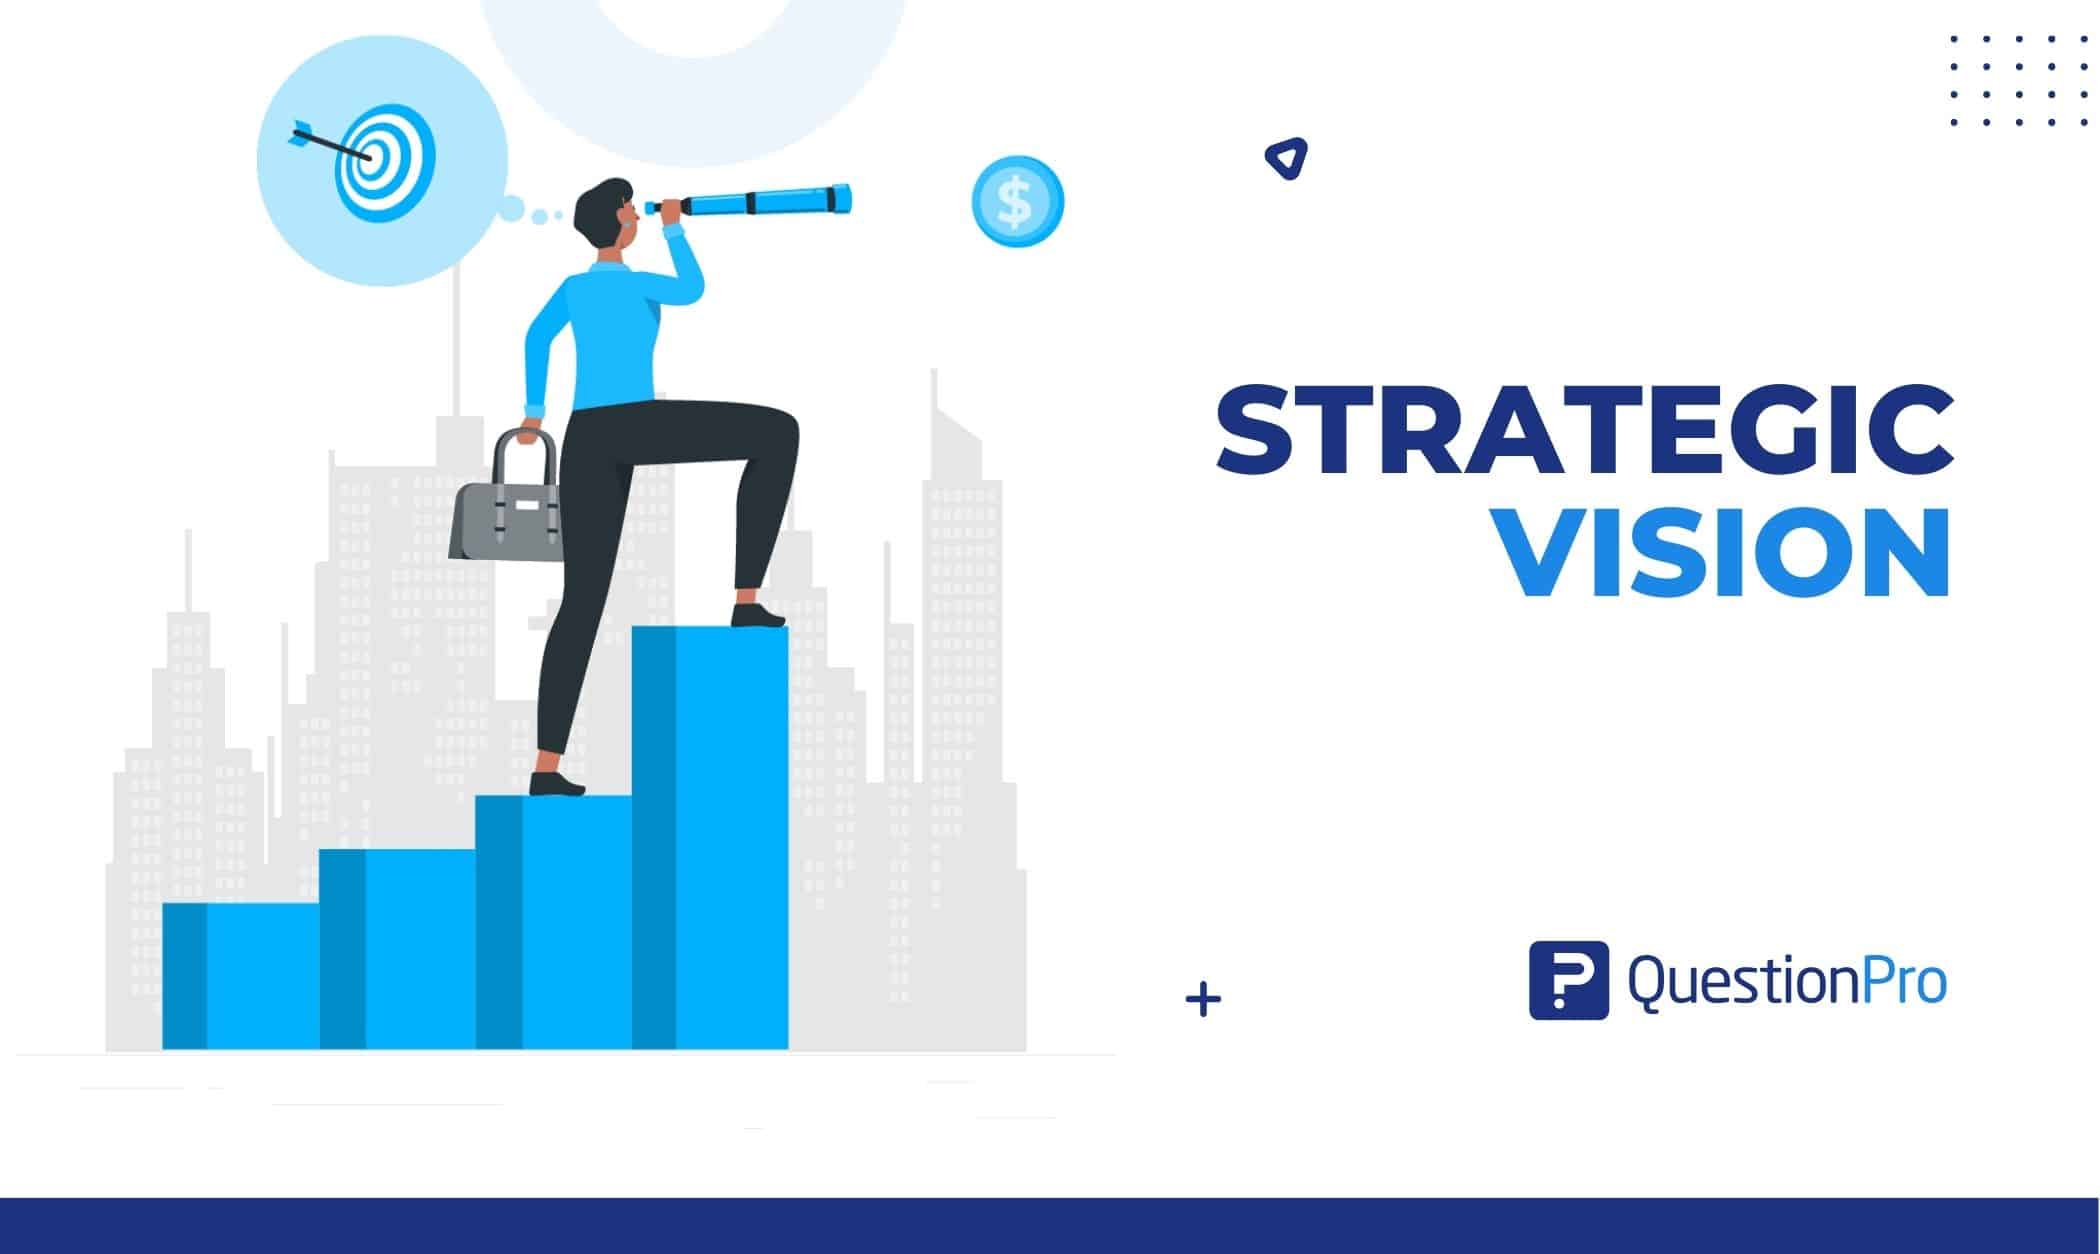 Creating a strategic vision for your company is important. It is a framework for improving organizational growth & achieving greater success.